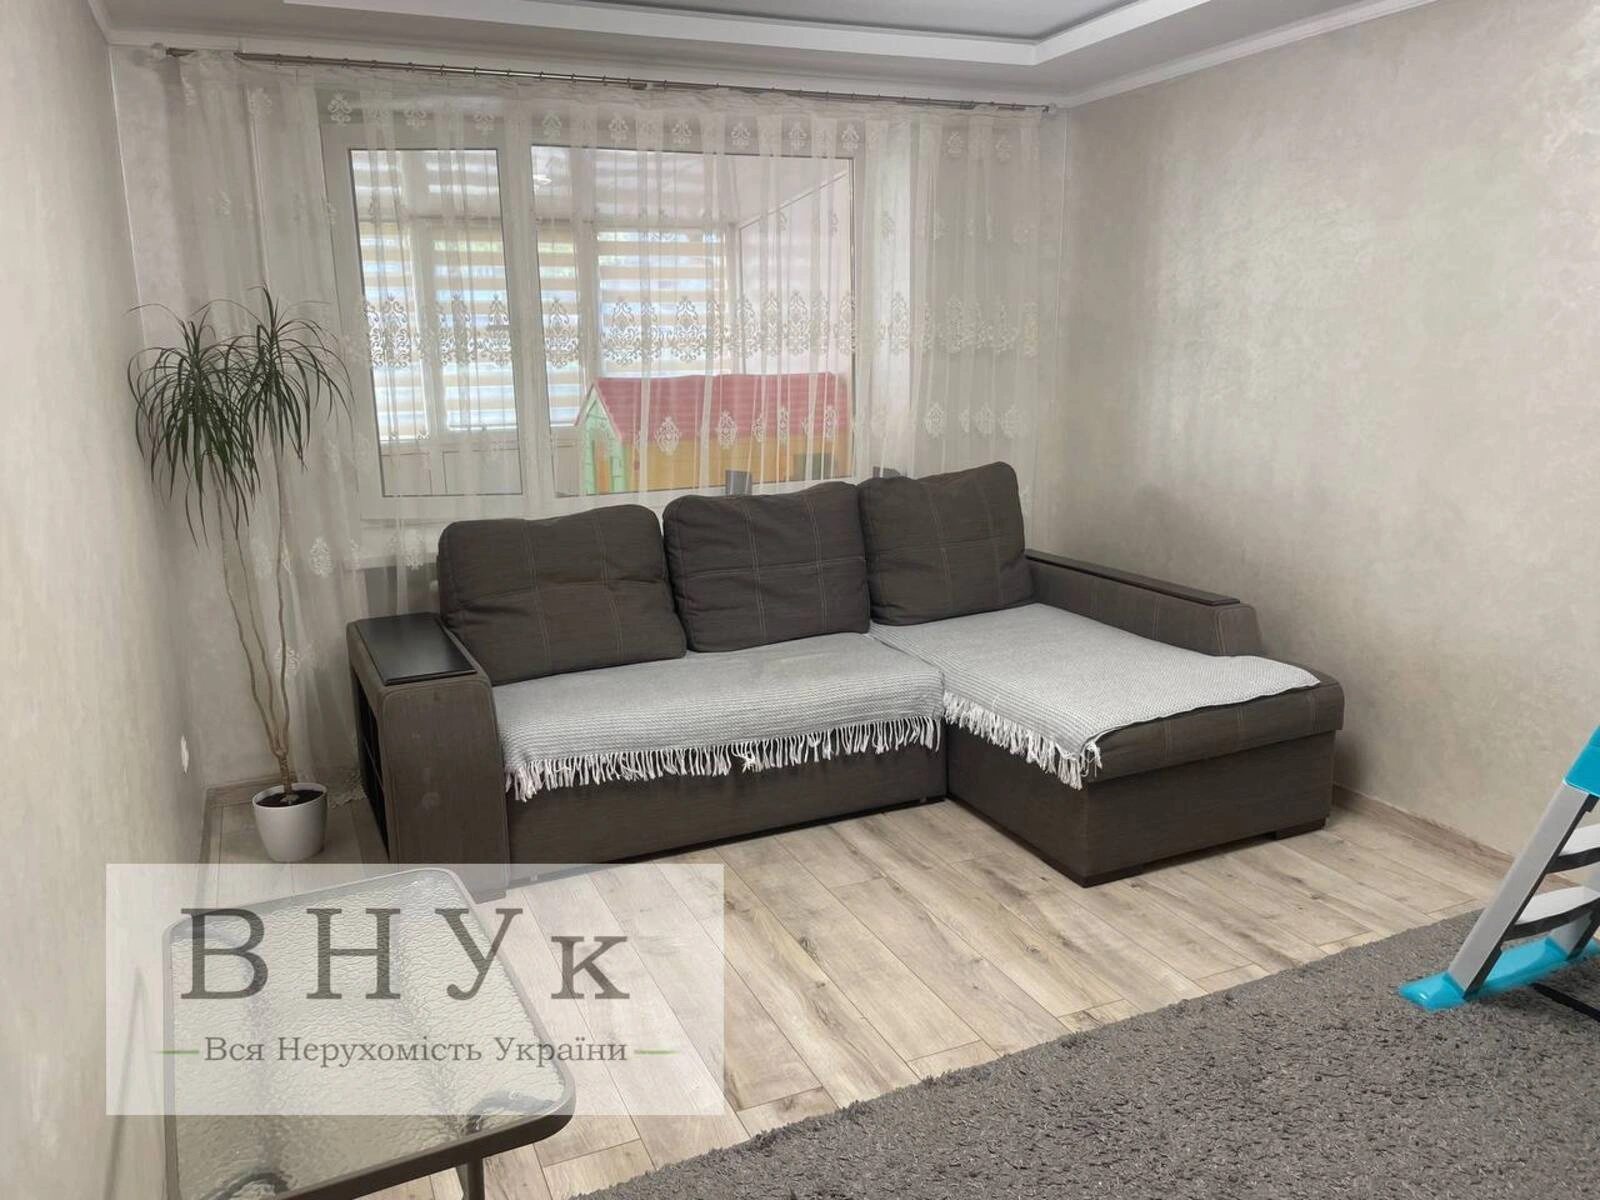 Apartments for sale. 4 rooms, 86 m², 1st floor/5 floors. Budnoho S. , Ternopil. 